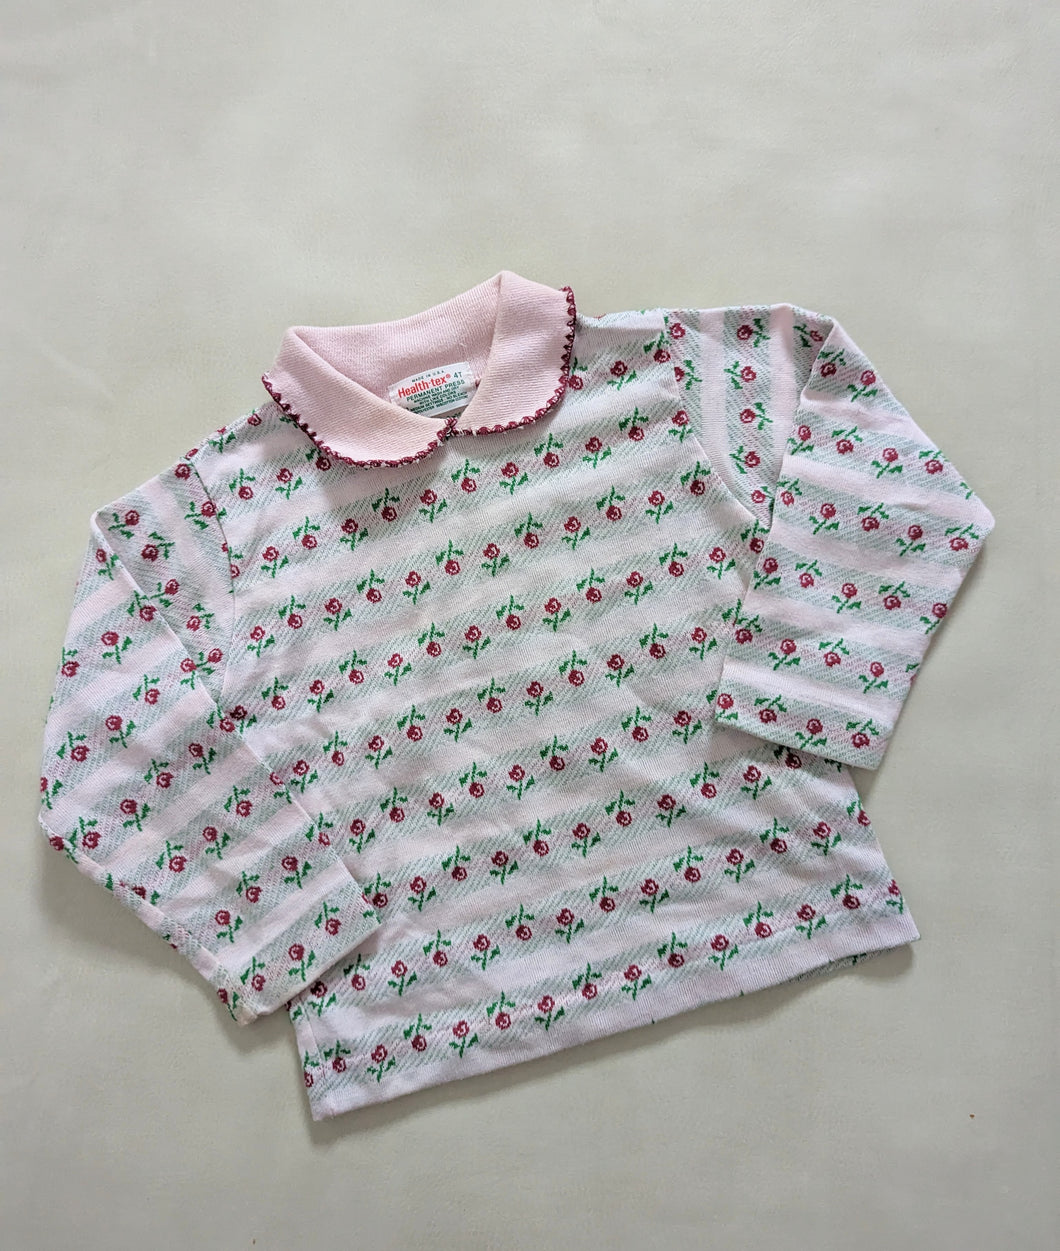 Healthtex Roses Collared Top 4t